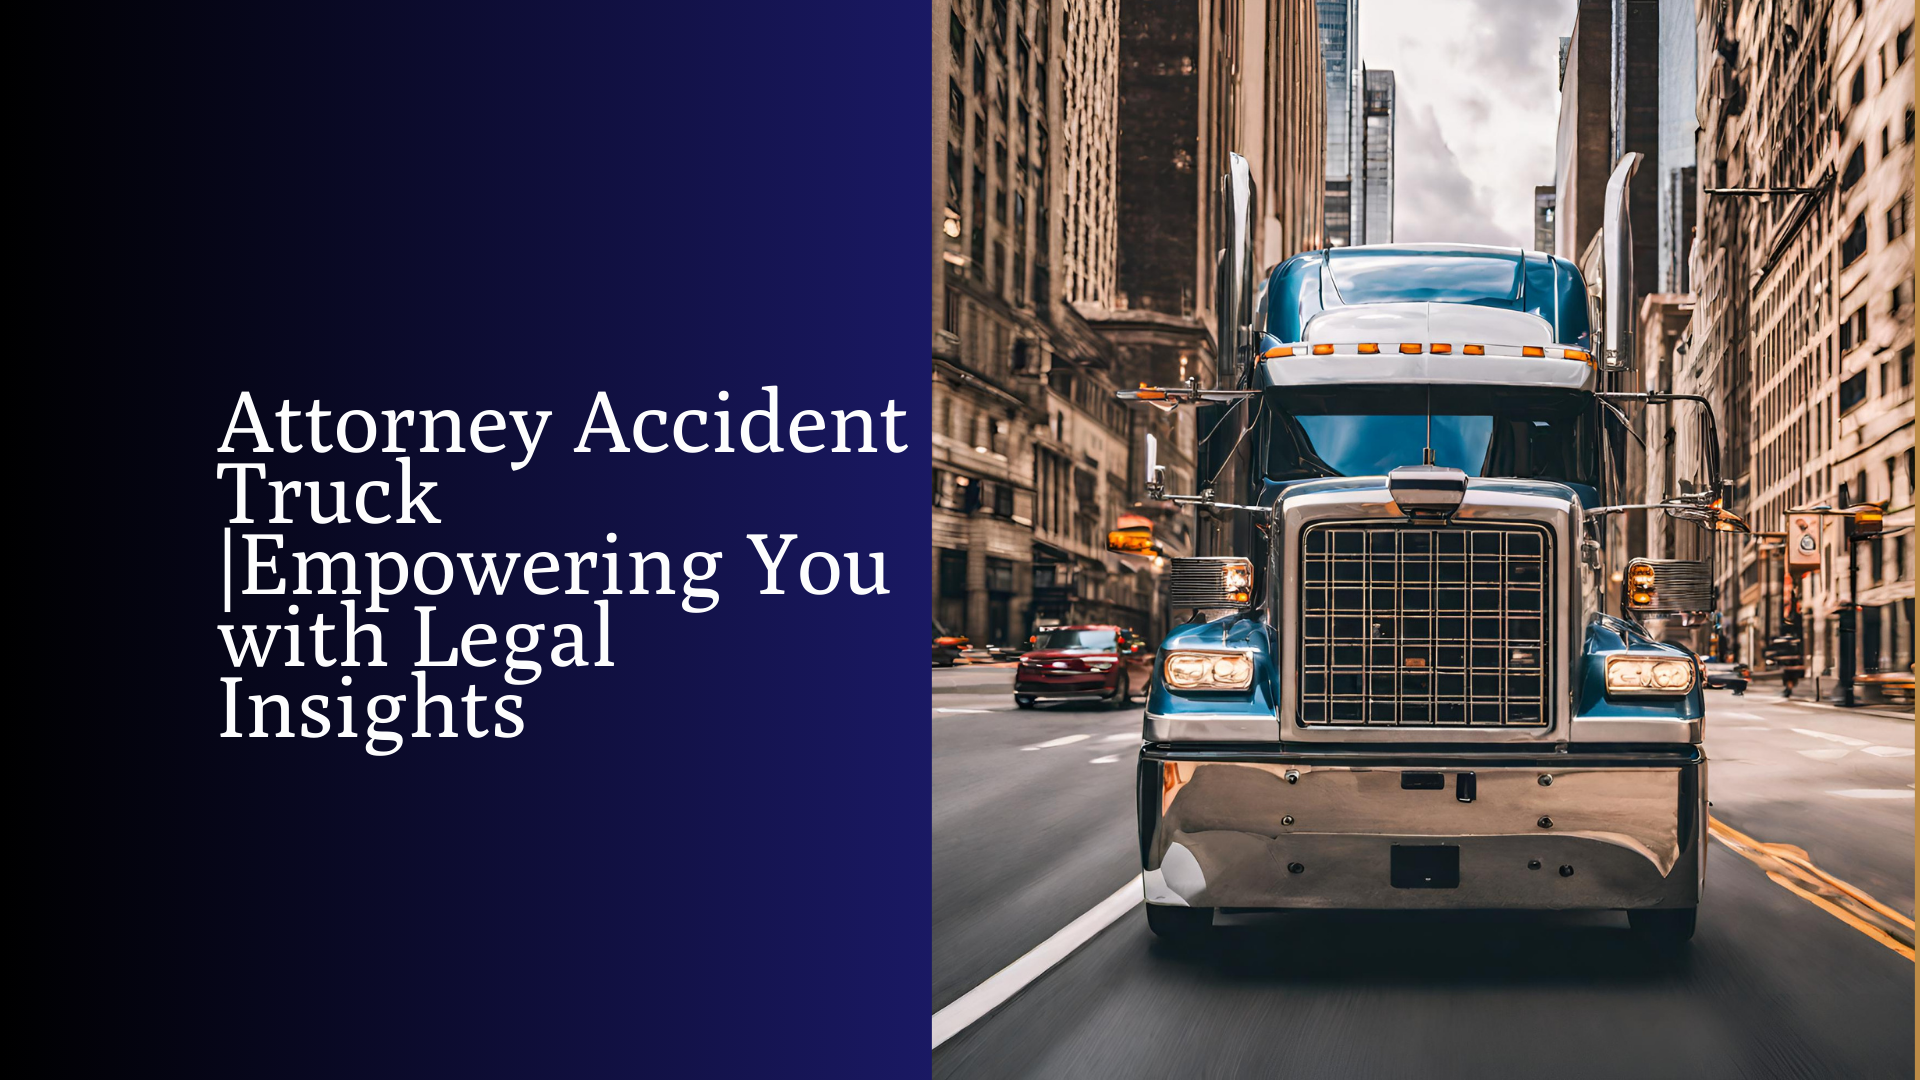 Attorney-Accident-Truck-Empowering-You-with-Legal-Insights